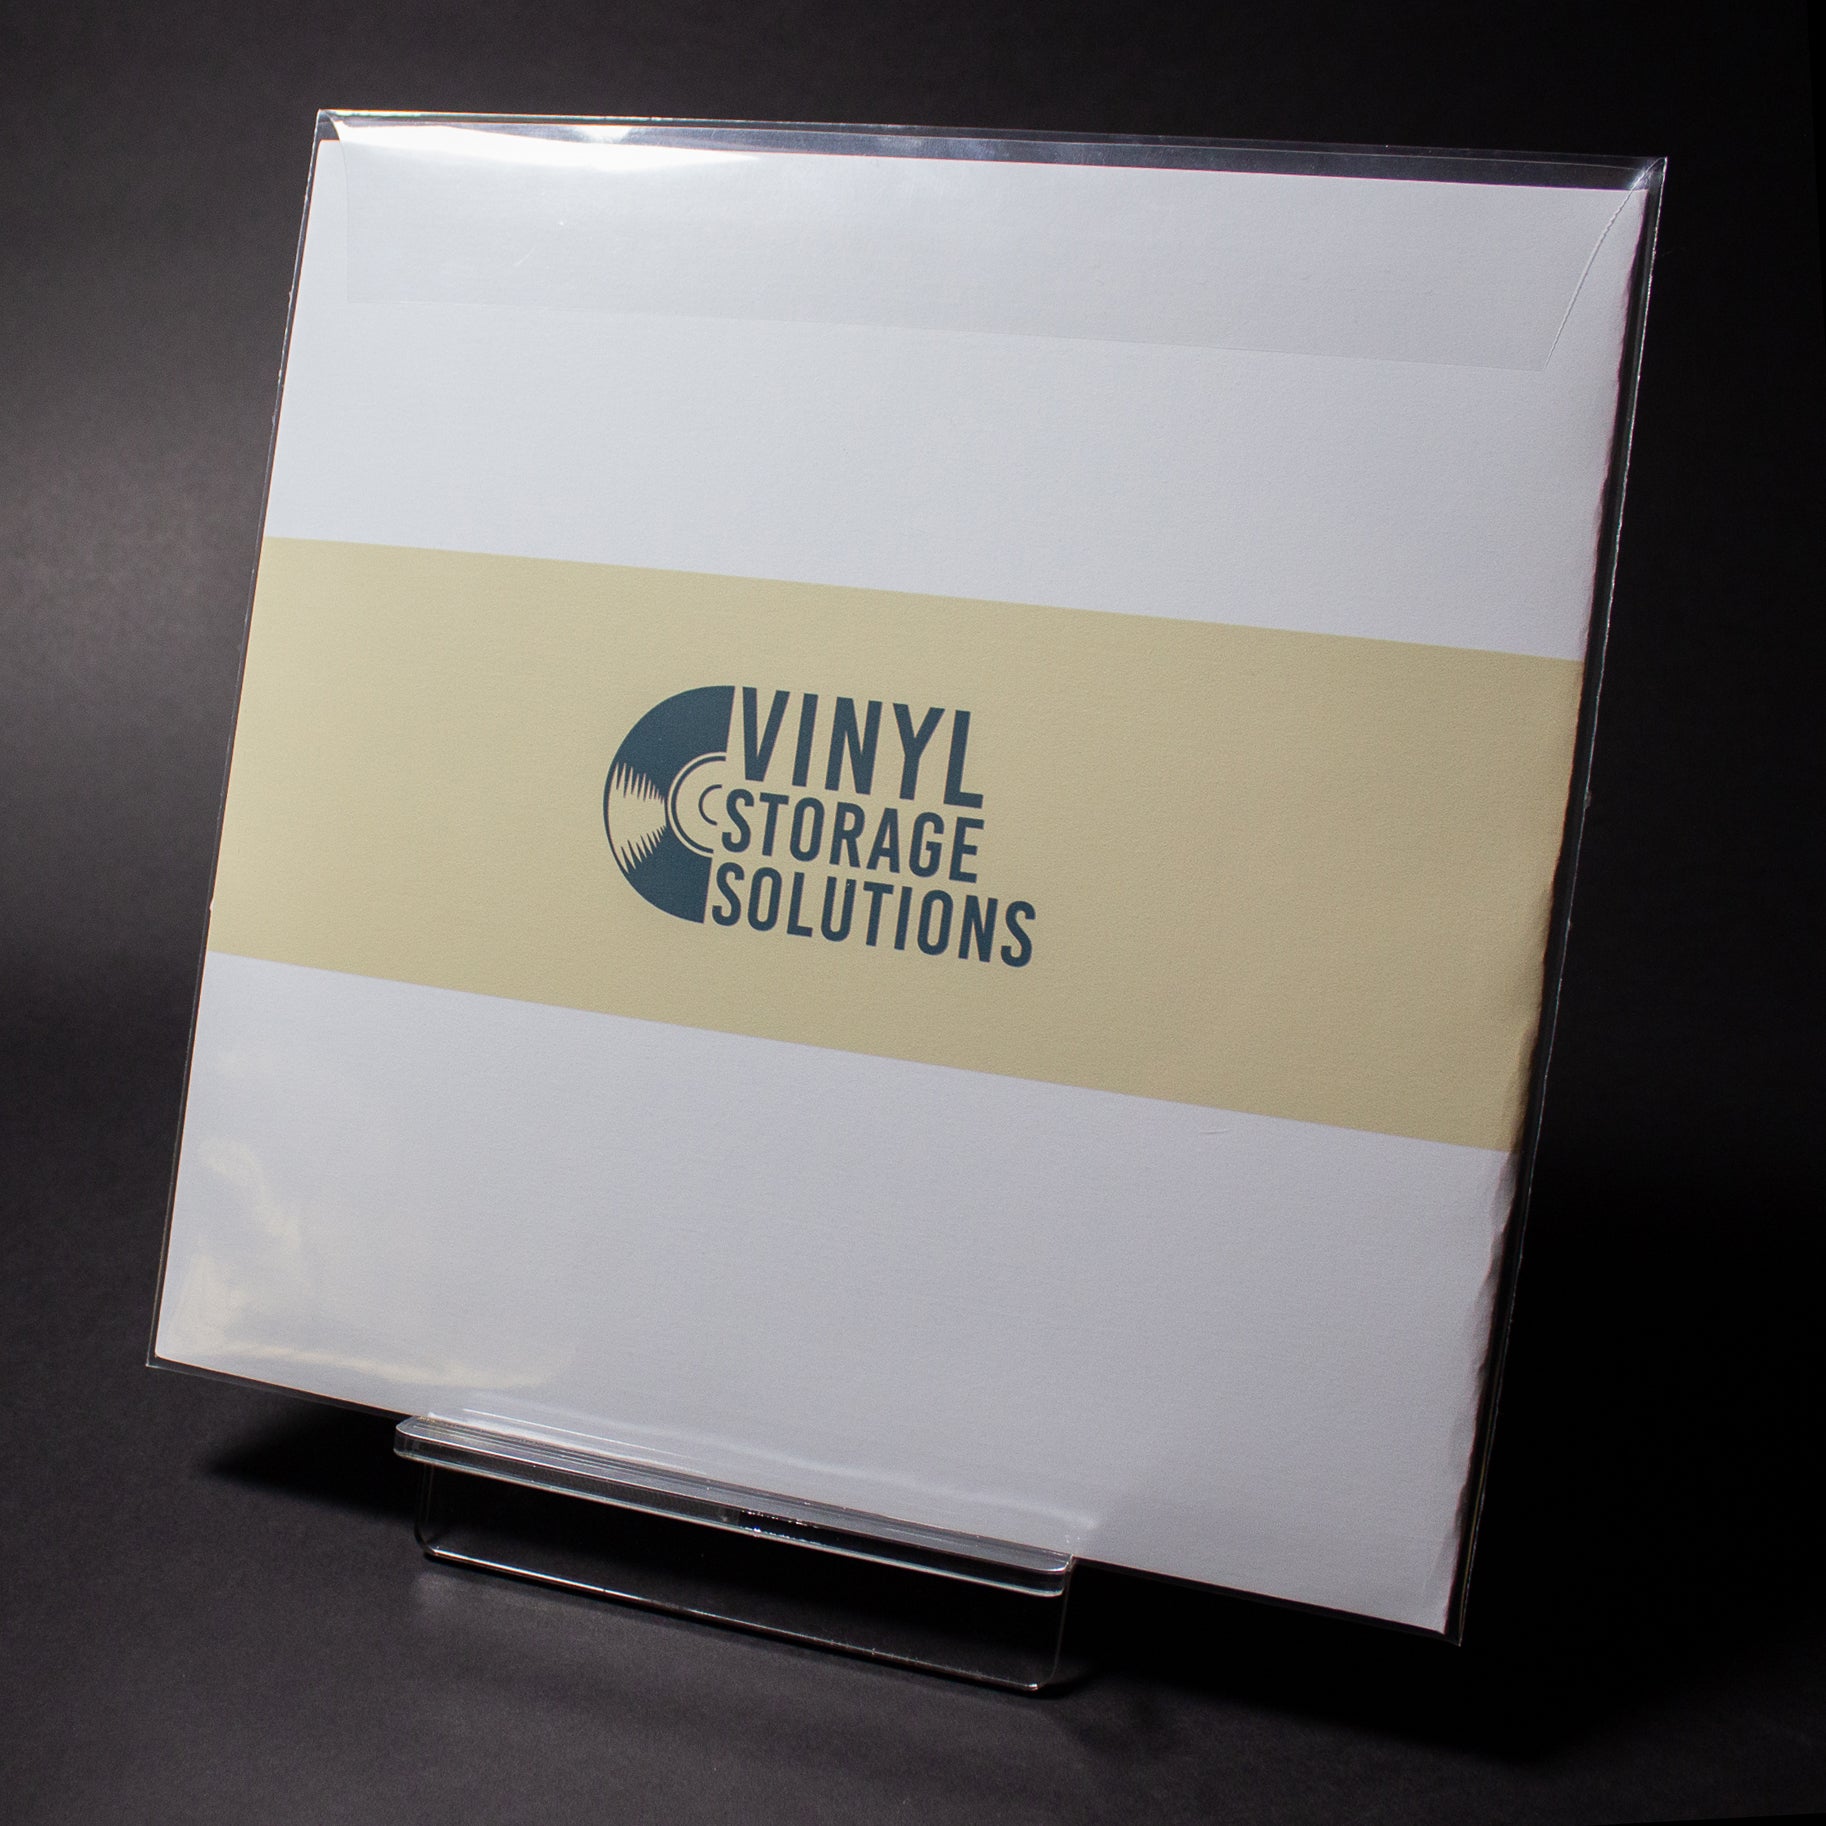 UV-Resistant 4 mil (.004) Soft Outer Sleeves (50 pack) – Vinyl Supply Co.